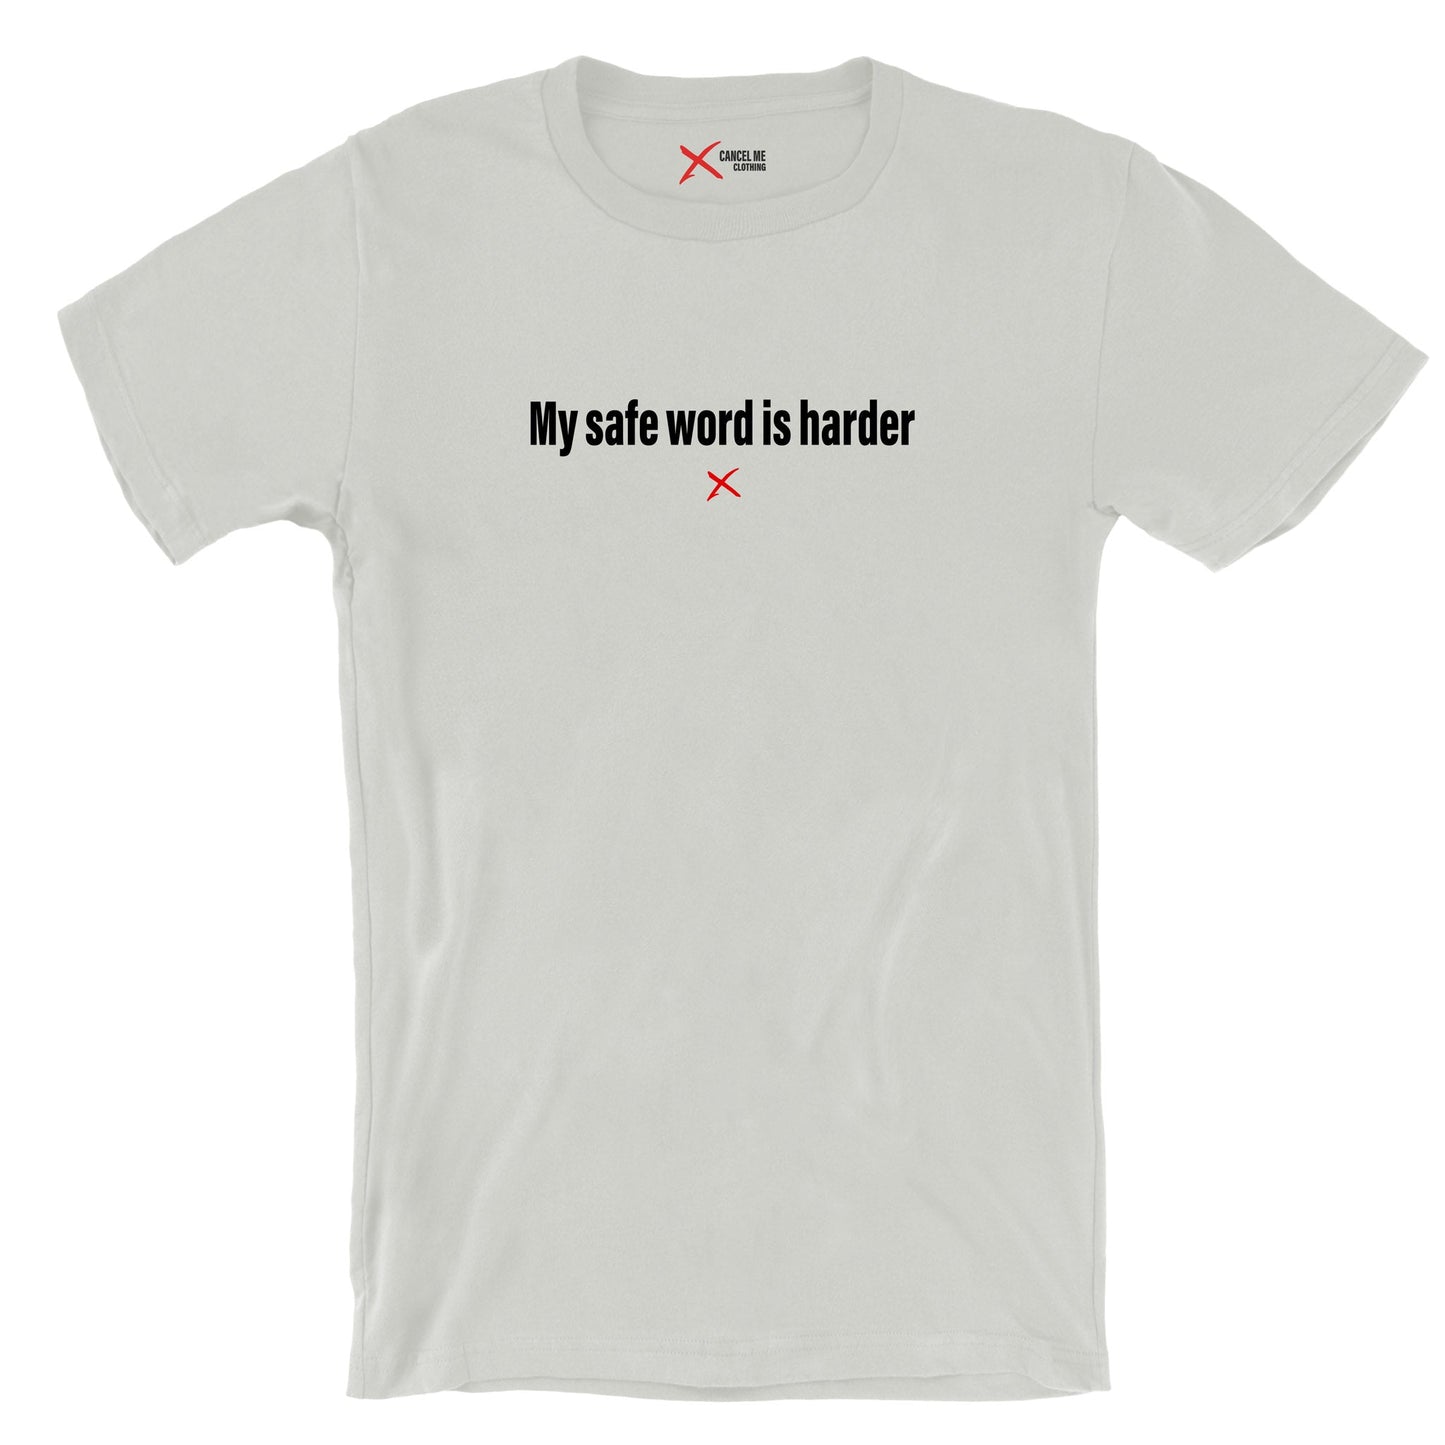 My safe word is harder - Shirt